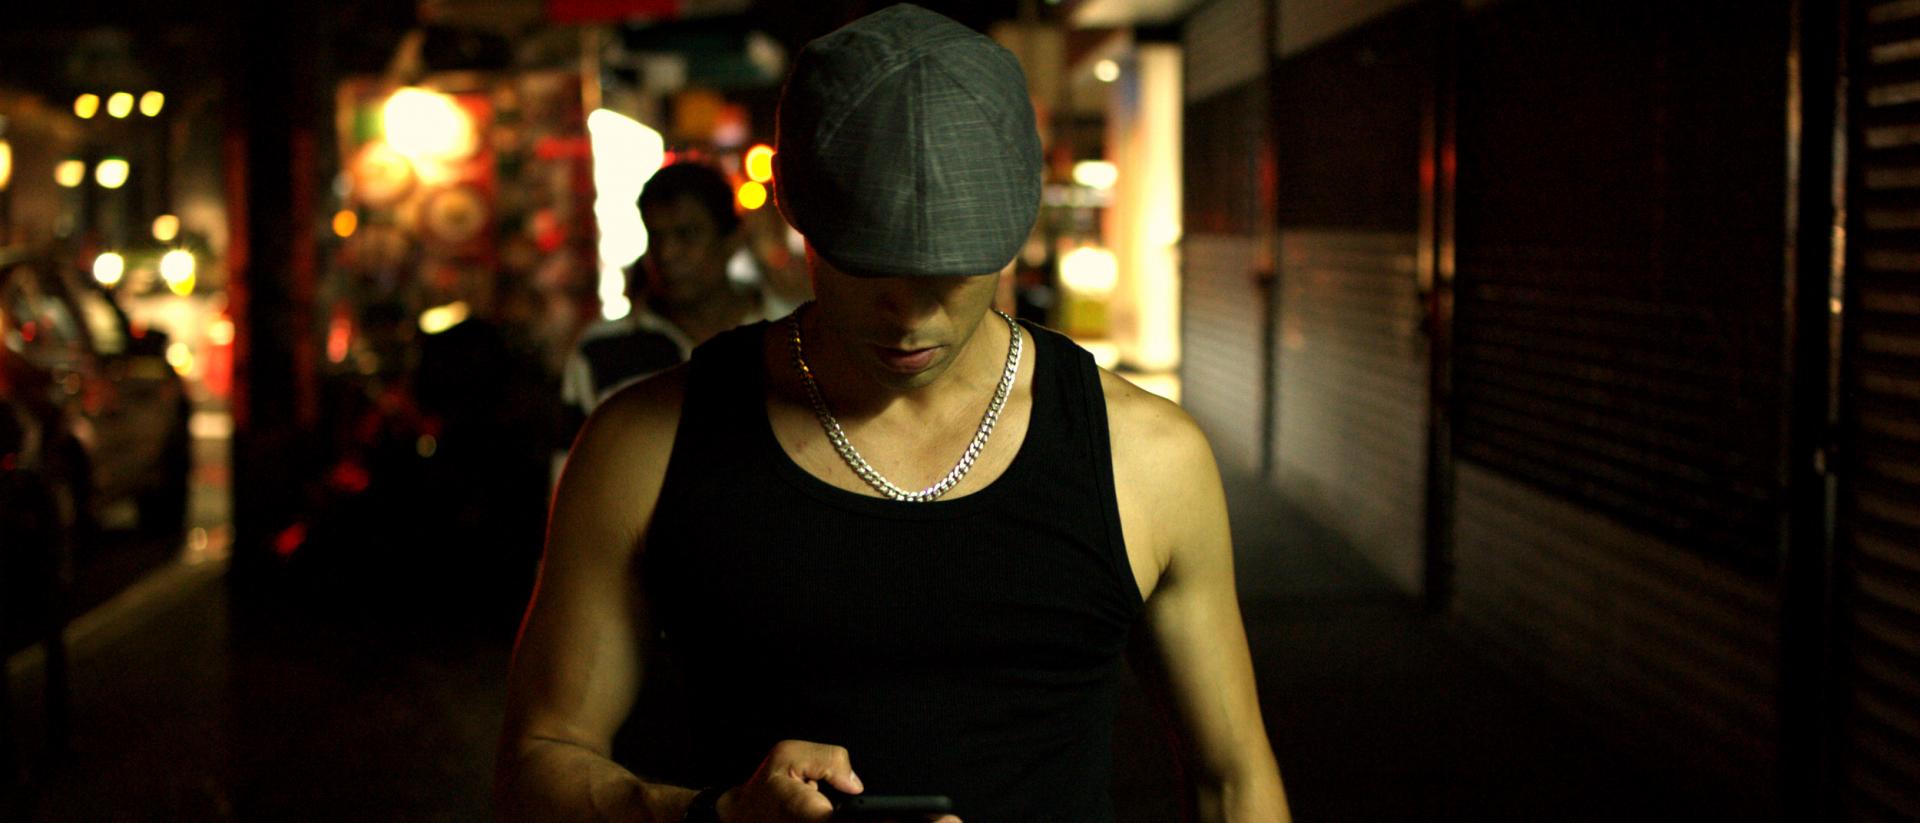 a person wearing a black vest and a grey flatcap looking down at their phone